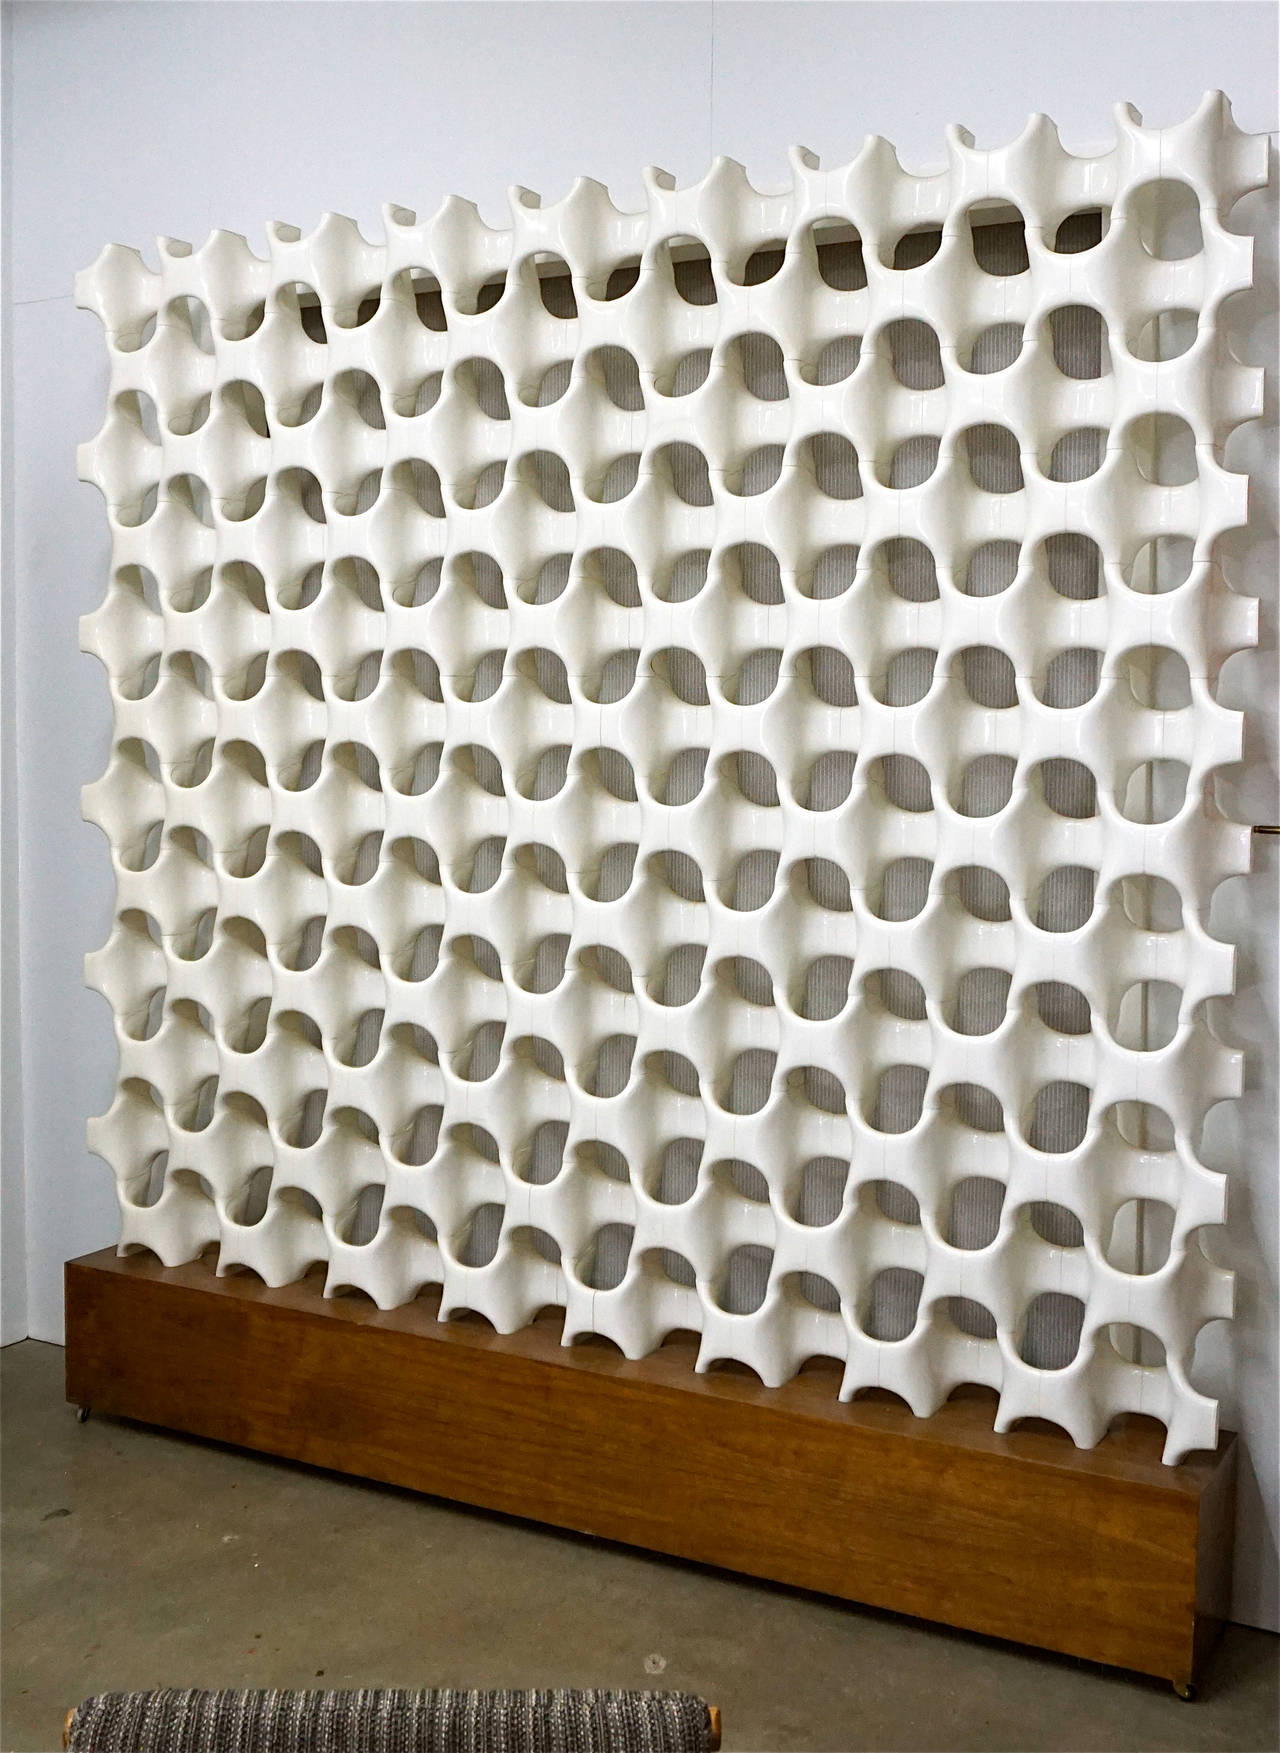 Molded Architectural Screen or Room Divider by Don Harvey